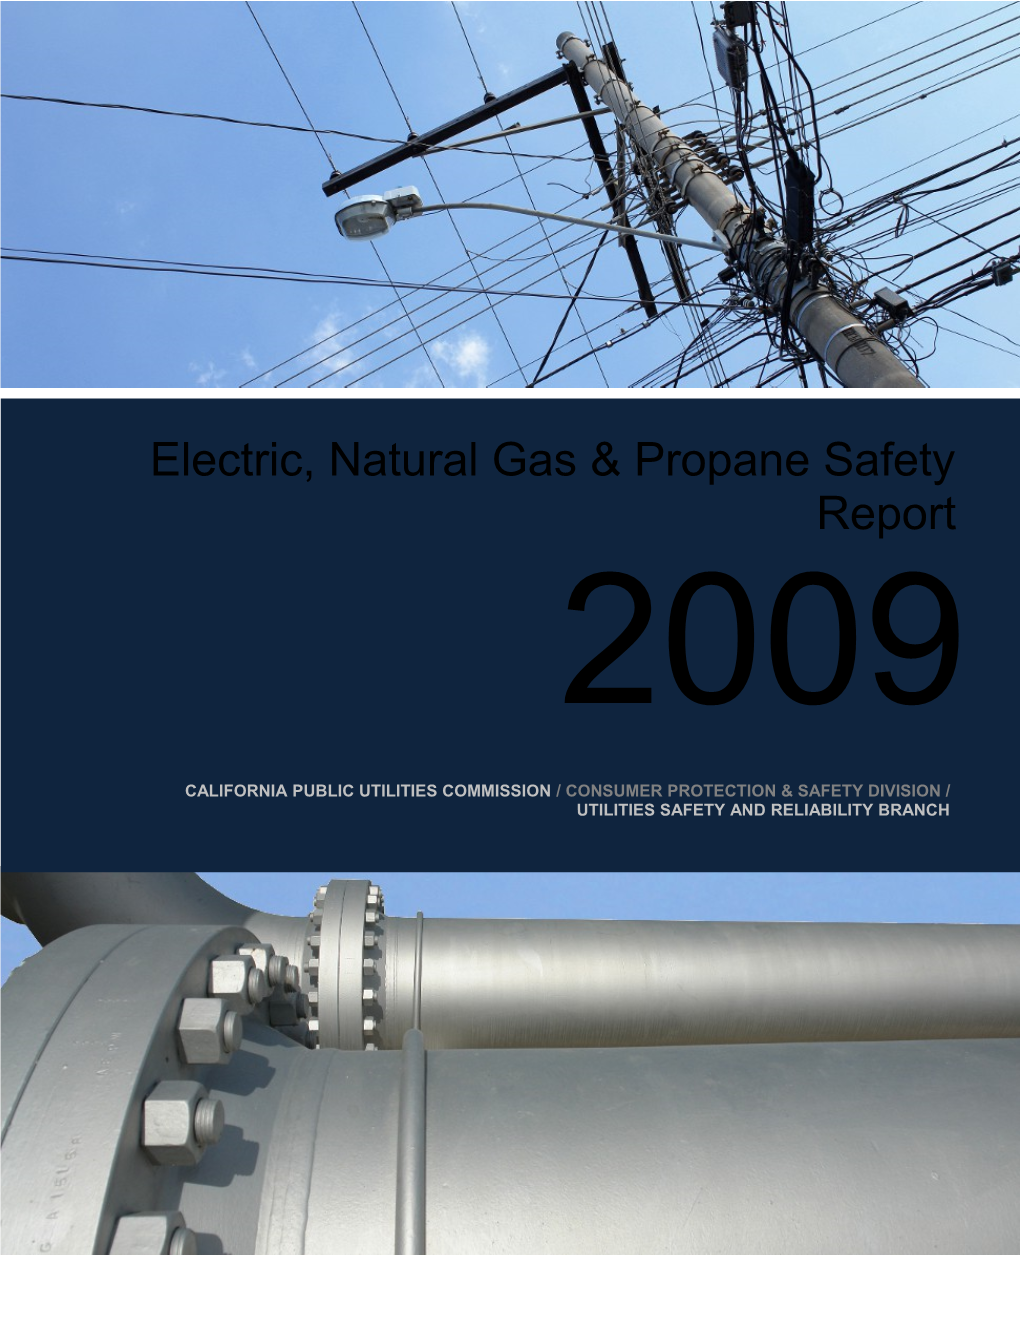 2009 Electric, Natural Gas & Propane